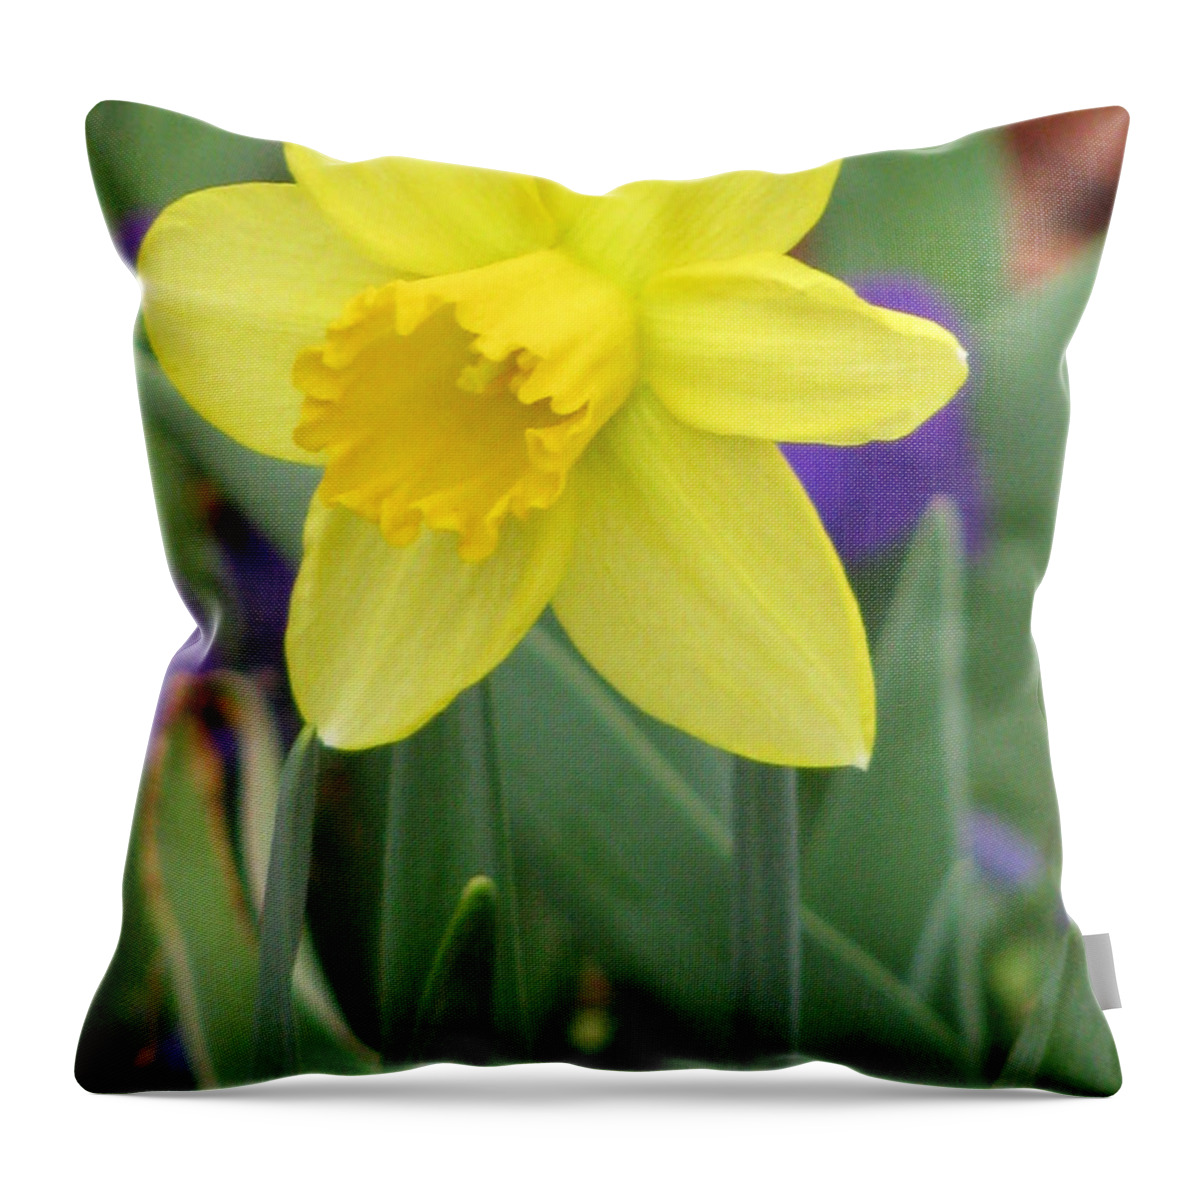 Daffodil Throw Pillow featuring the photograph Daffodil 15 by Pamela Critchlow